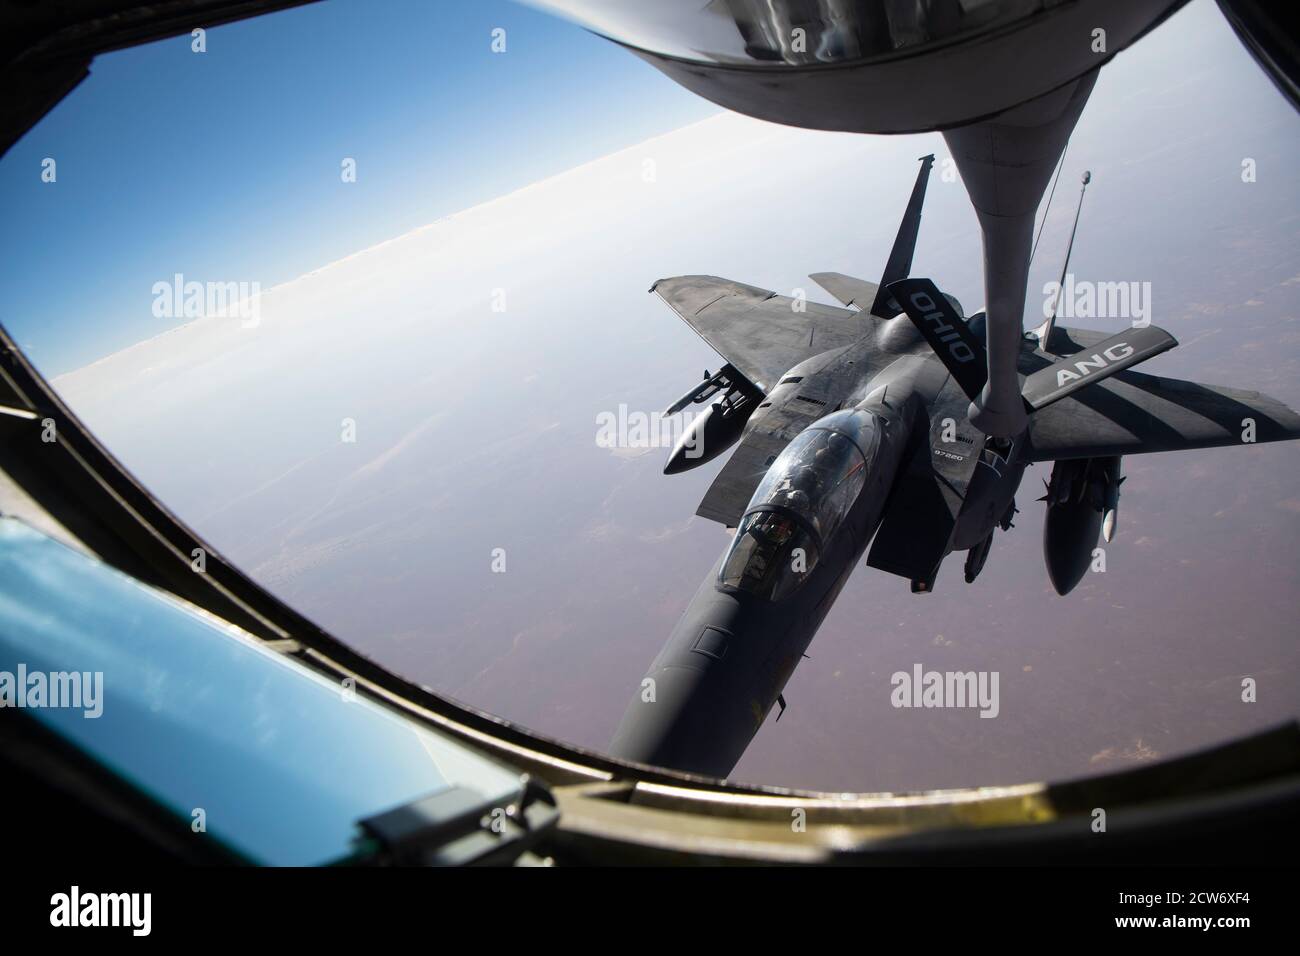 A U.S. Air Force F-15E Strike Eagle conducts an aerial refueling with a KC-135 Stratotanker over the U.S. Central Command area of responsibility, Aug. 31, 2020.  The F-15E Strike Eagle is a dual-role fighter designed to perform air-to-air and air-to-ground missions, demonstrating U.S. Air Force Central Commands' posture to deter regional aggressors.  (U.S. Air Force photo by Senior Airman Duncan C. Bevan) Stock Photo